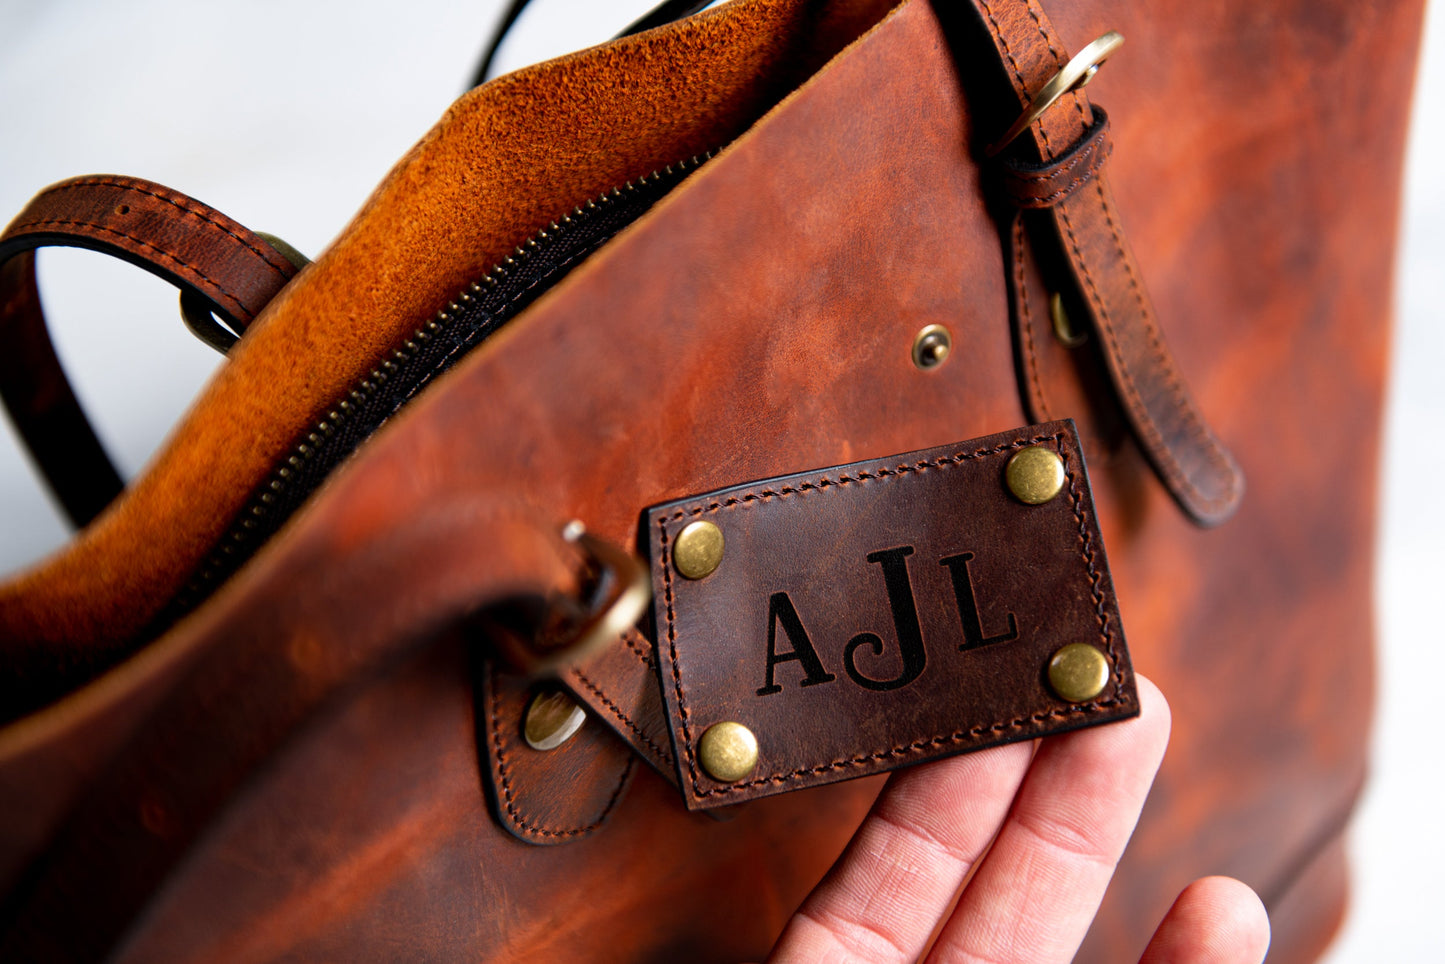 The Destin Personalized Distressed Leather Tote